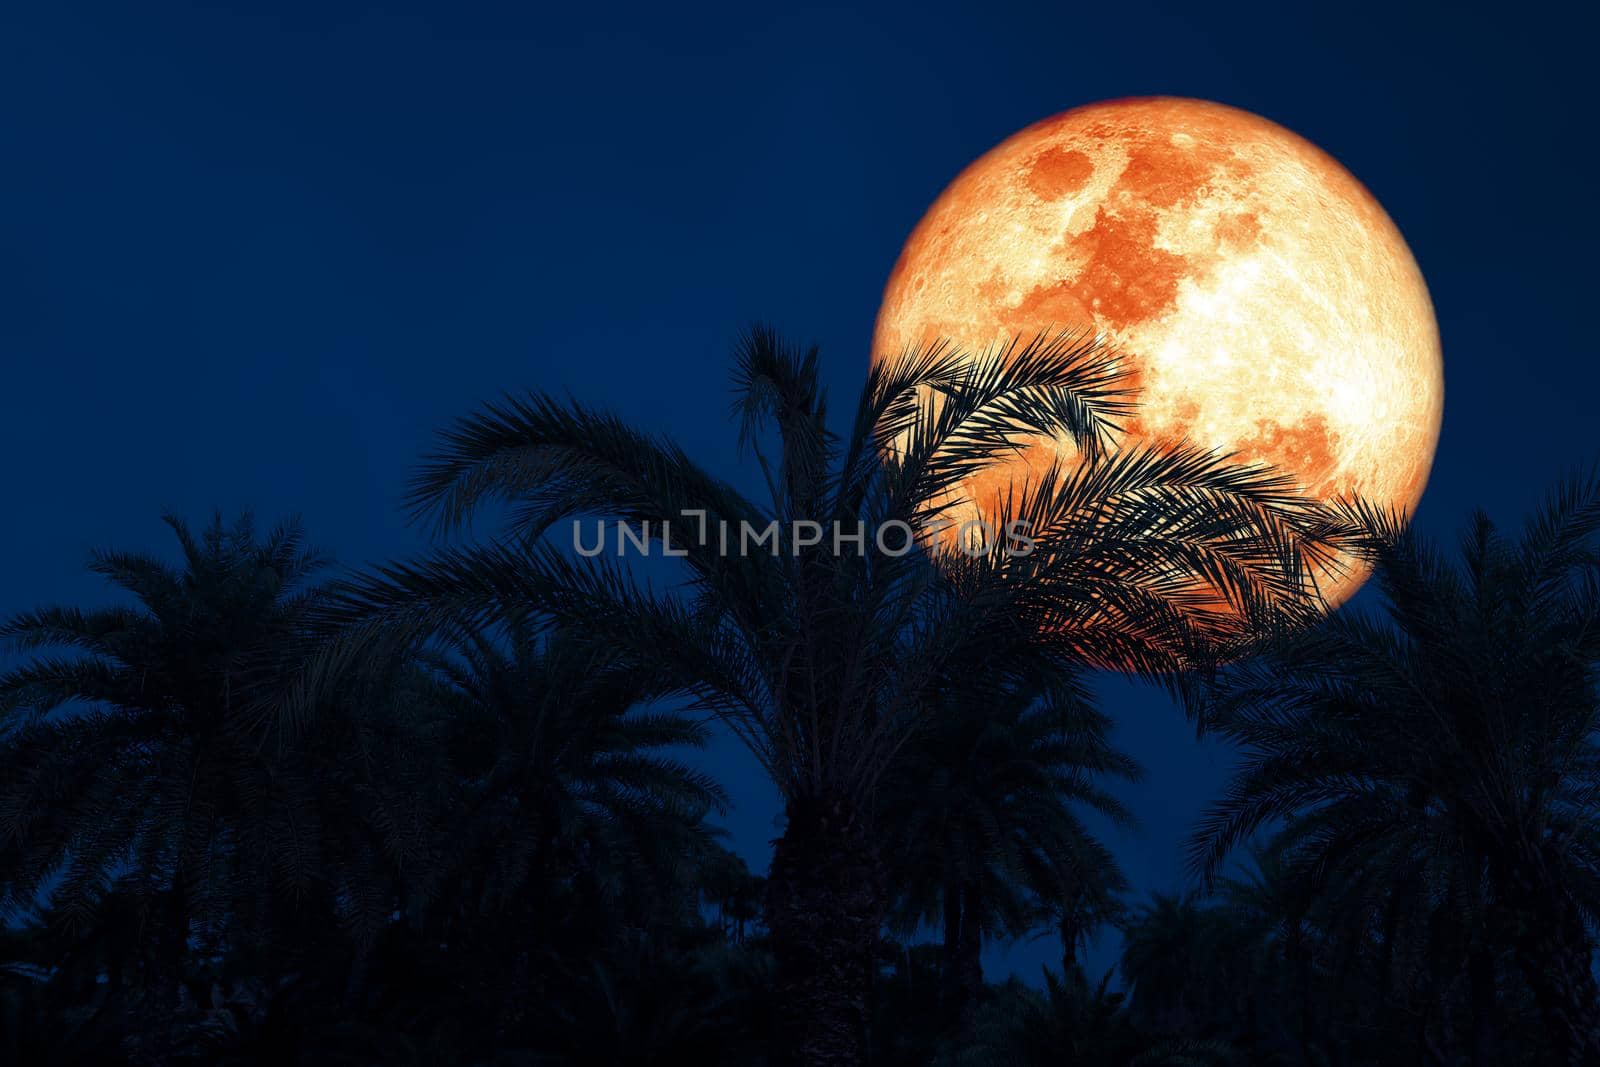 Full harvest blood moon and silhouette coconut tree in the night sky, Elements of this image furnished by NASA